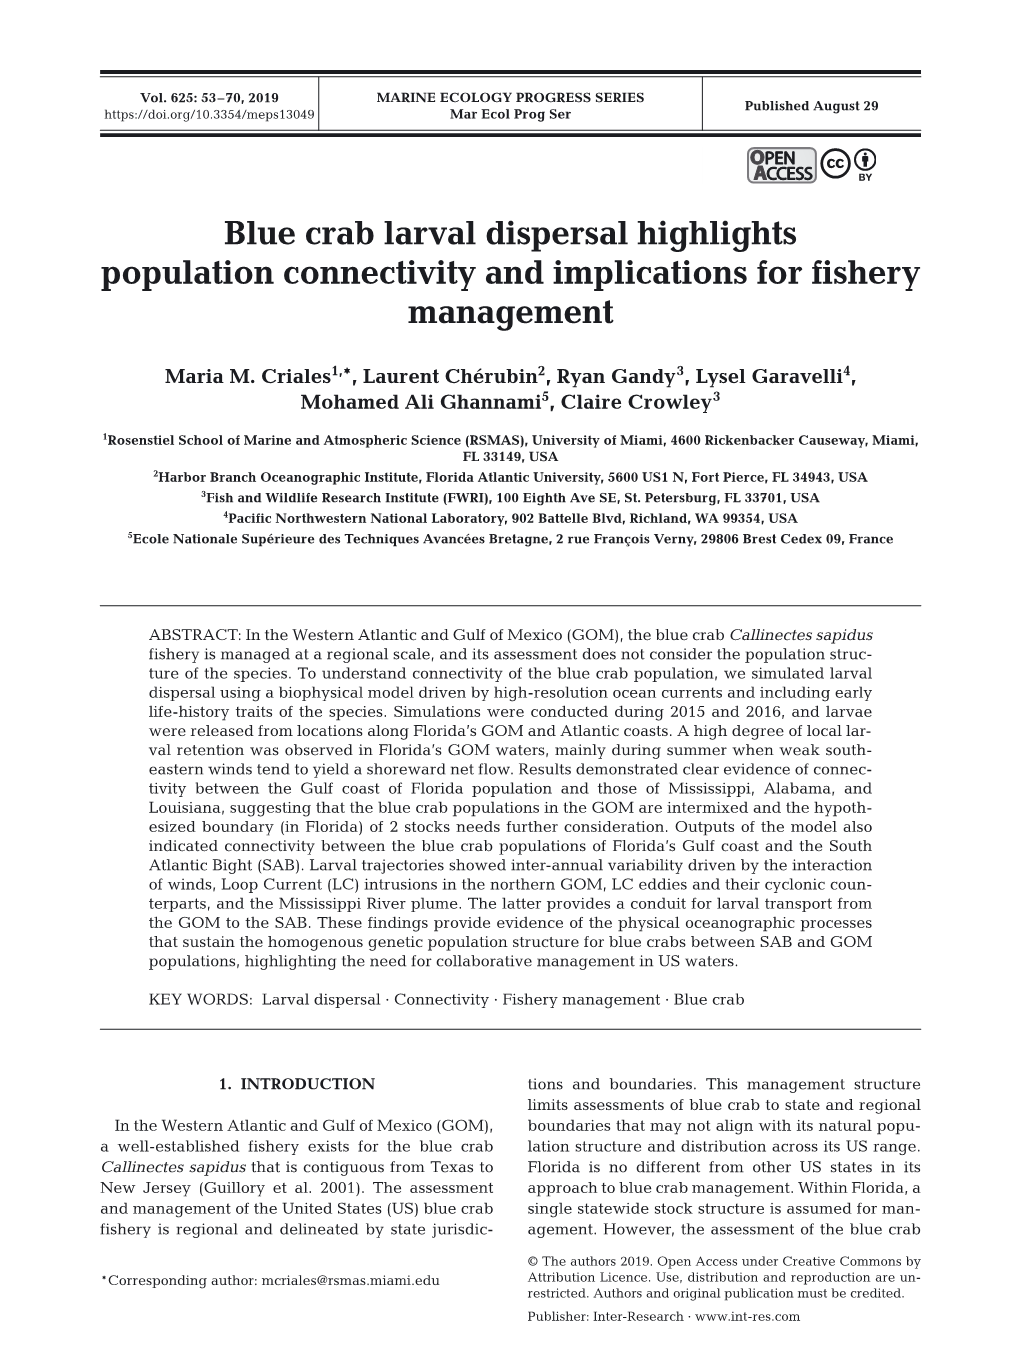 Blue Crab Larval Dispersal Highlights Population Connectivity and Implications for Fishery Management